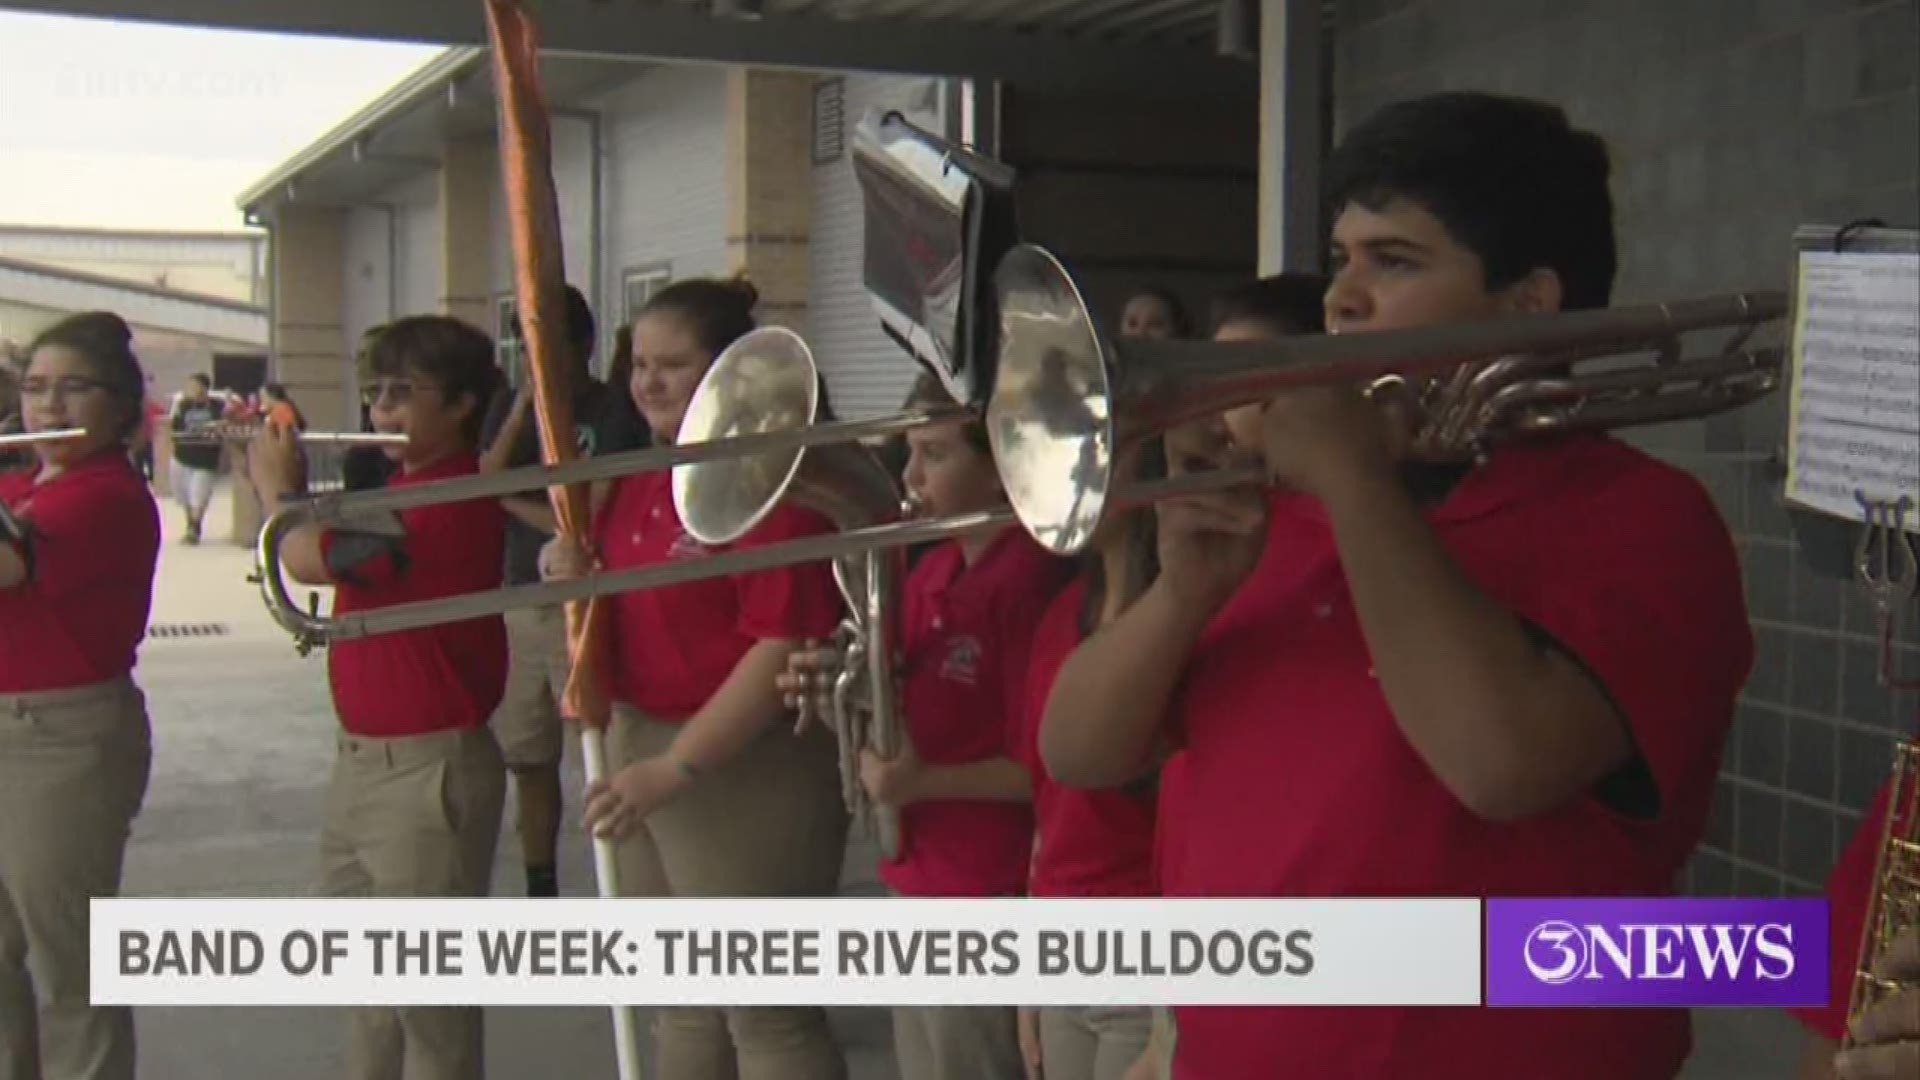 It's time for the Friday Night Sports Blitz, and that means crowning this week's winner of the 3News Band of the Week contest -- the Three Rivers Bulldogs!